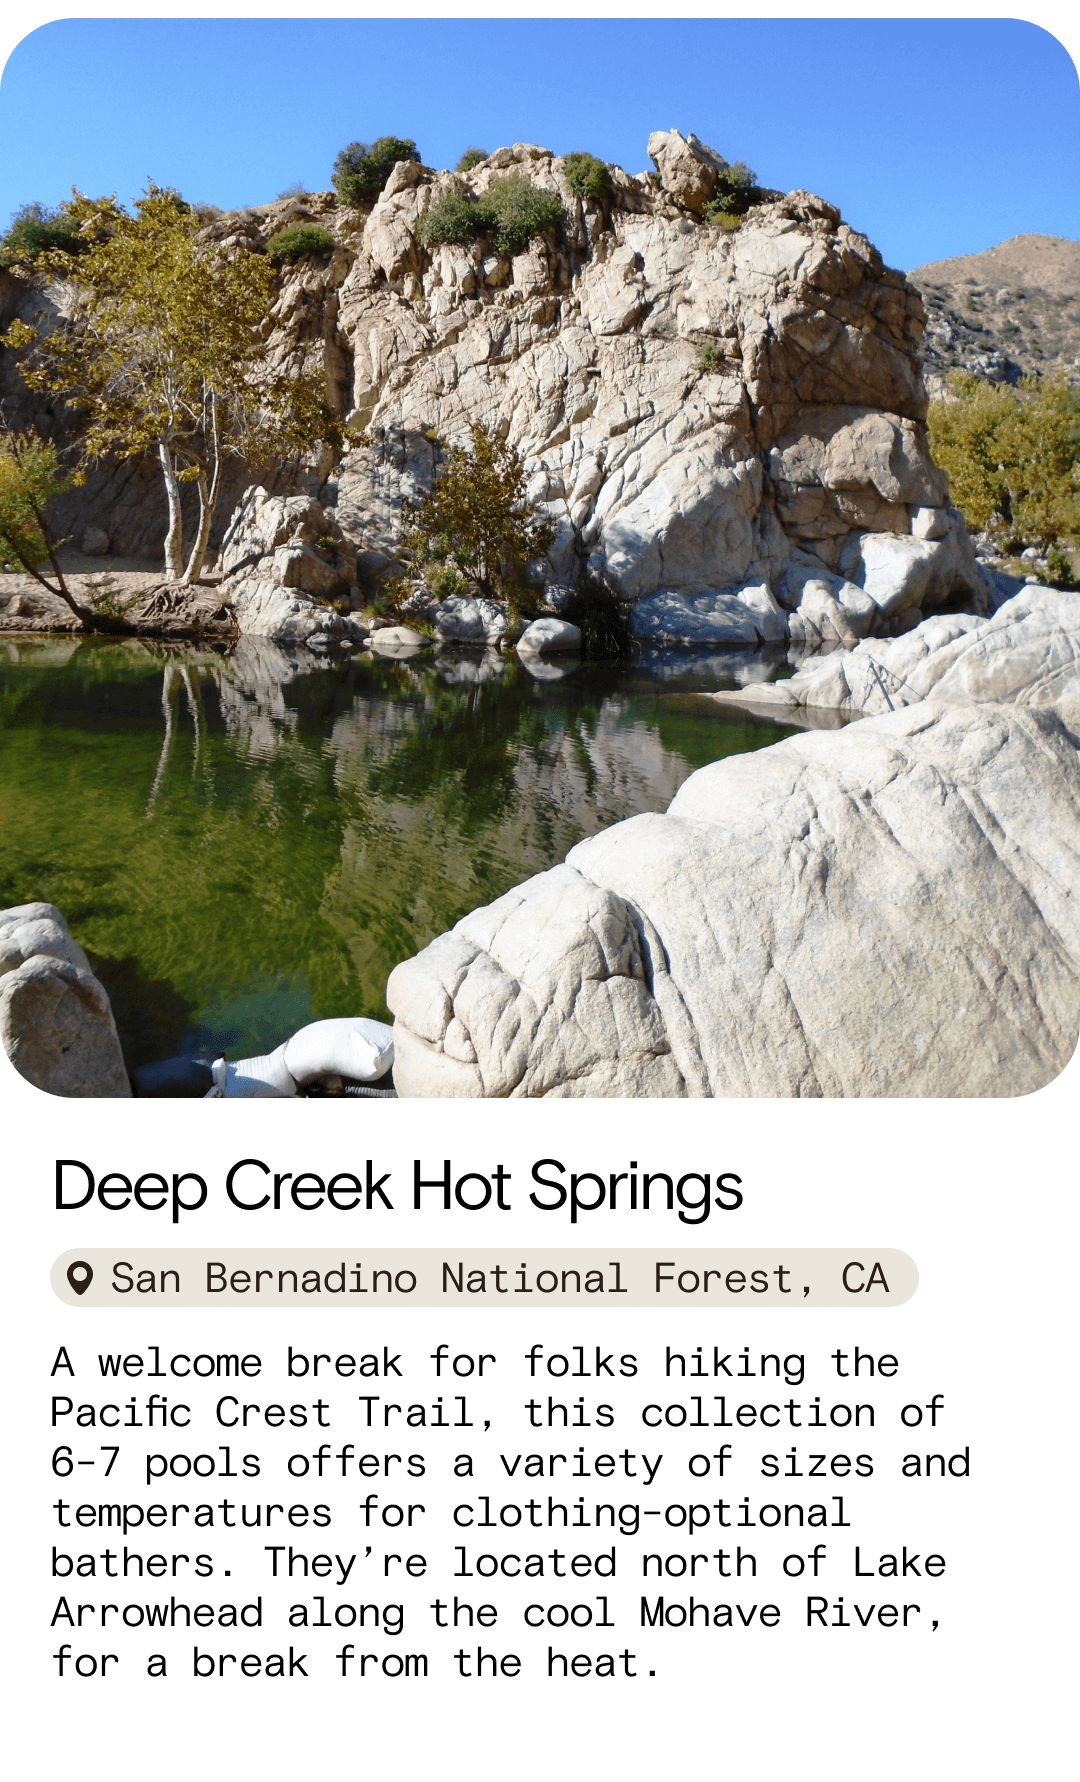 Deep Creek Hot Springs San Bernadino National Forest, CA A welcome break for folks hiking the Pacific Crest Trail, this collection of 6-7 pools offers a variety of sizes and temperatures for clothing-optional bathers. They’re located north of Lake Arrowhead along the cool Mohave River, for a break from the heat.